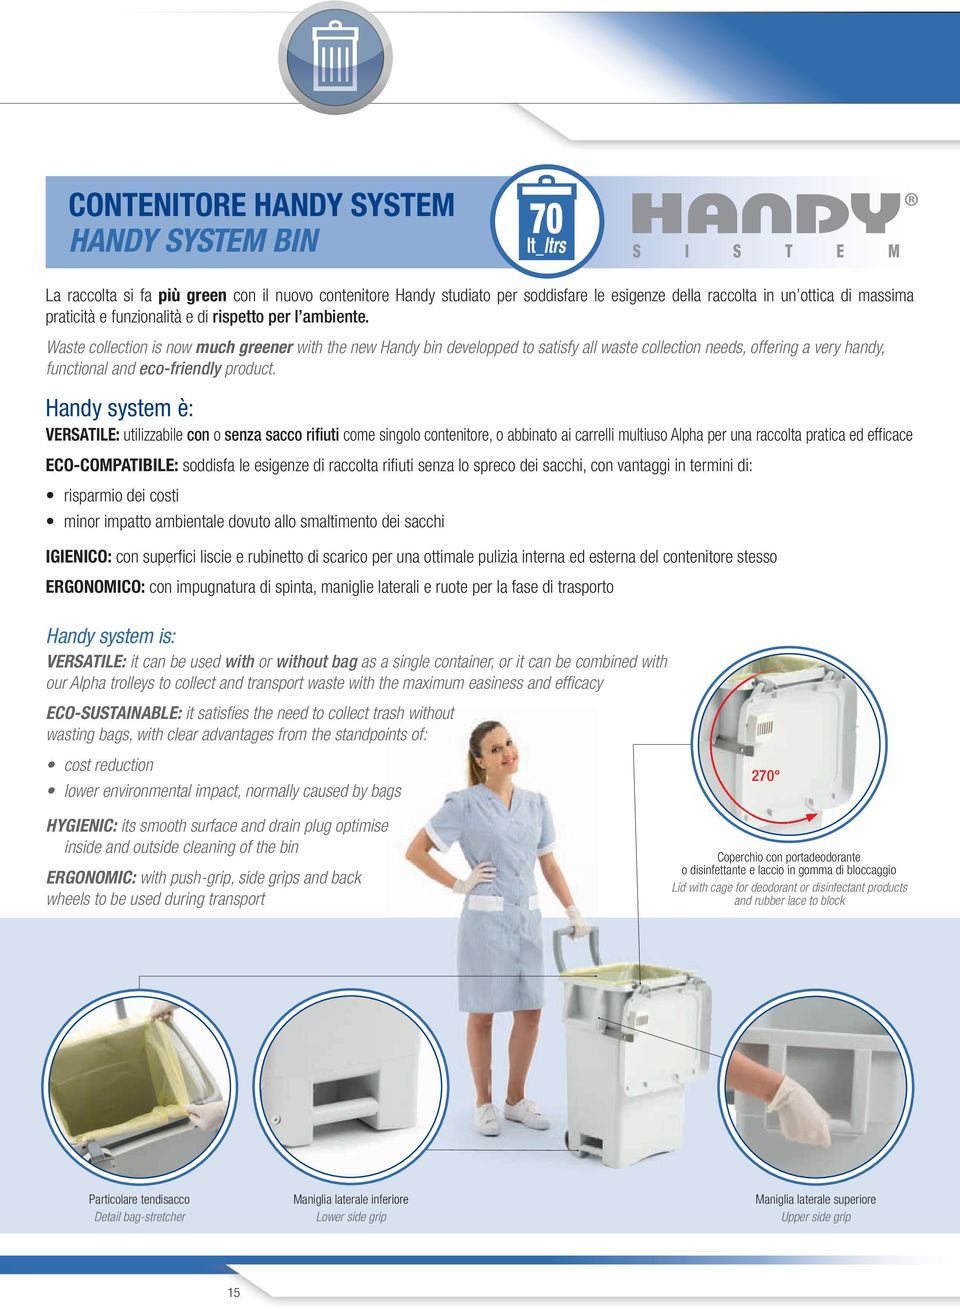 Waste collection is now much greener with the new Handy bin developped to satisfy all waste collection needs, offering a very handy, functional and eco-friendly product.